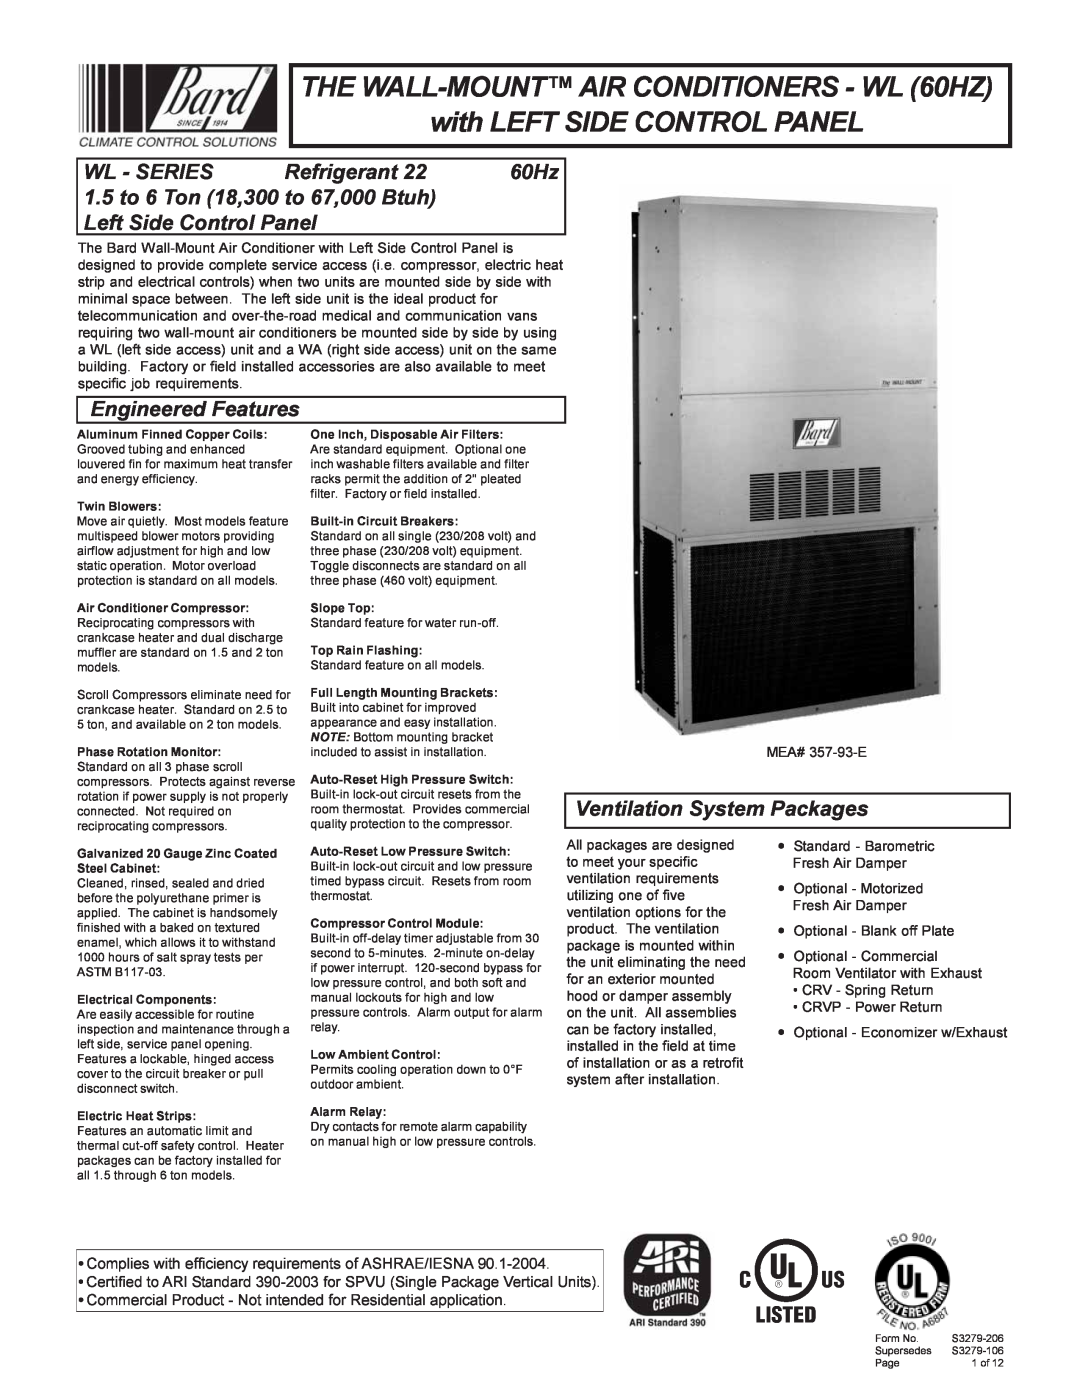 Bard 357-93-E manual Wl - Series, Refrigerant, 60Hz, Engineered Features, Ventilation System Packages 